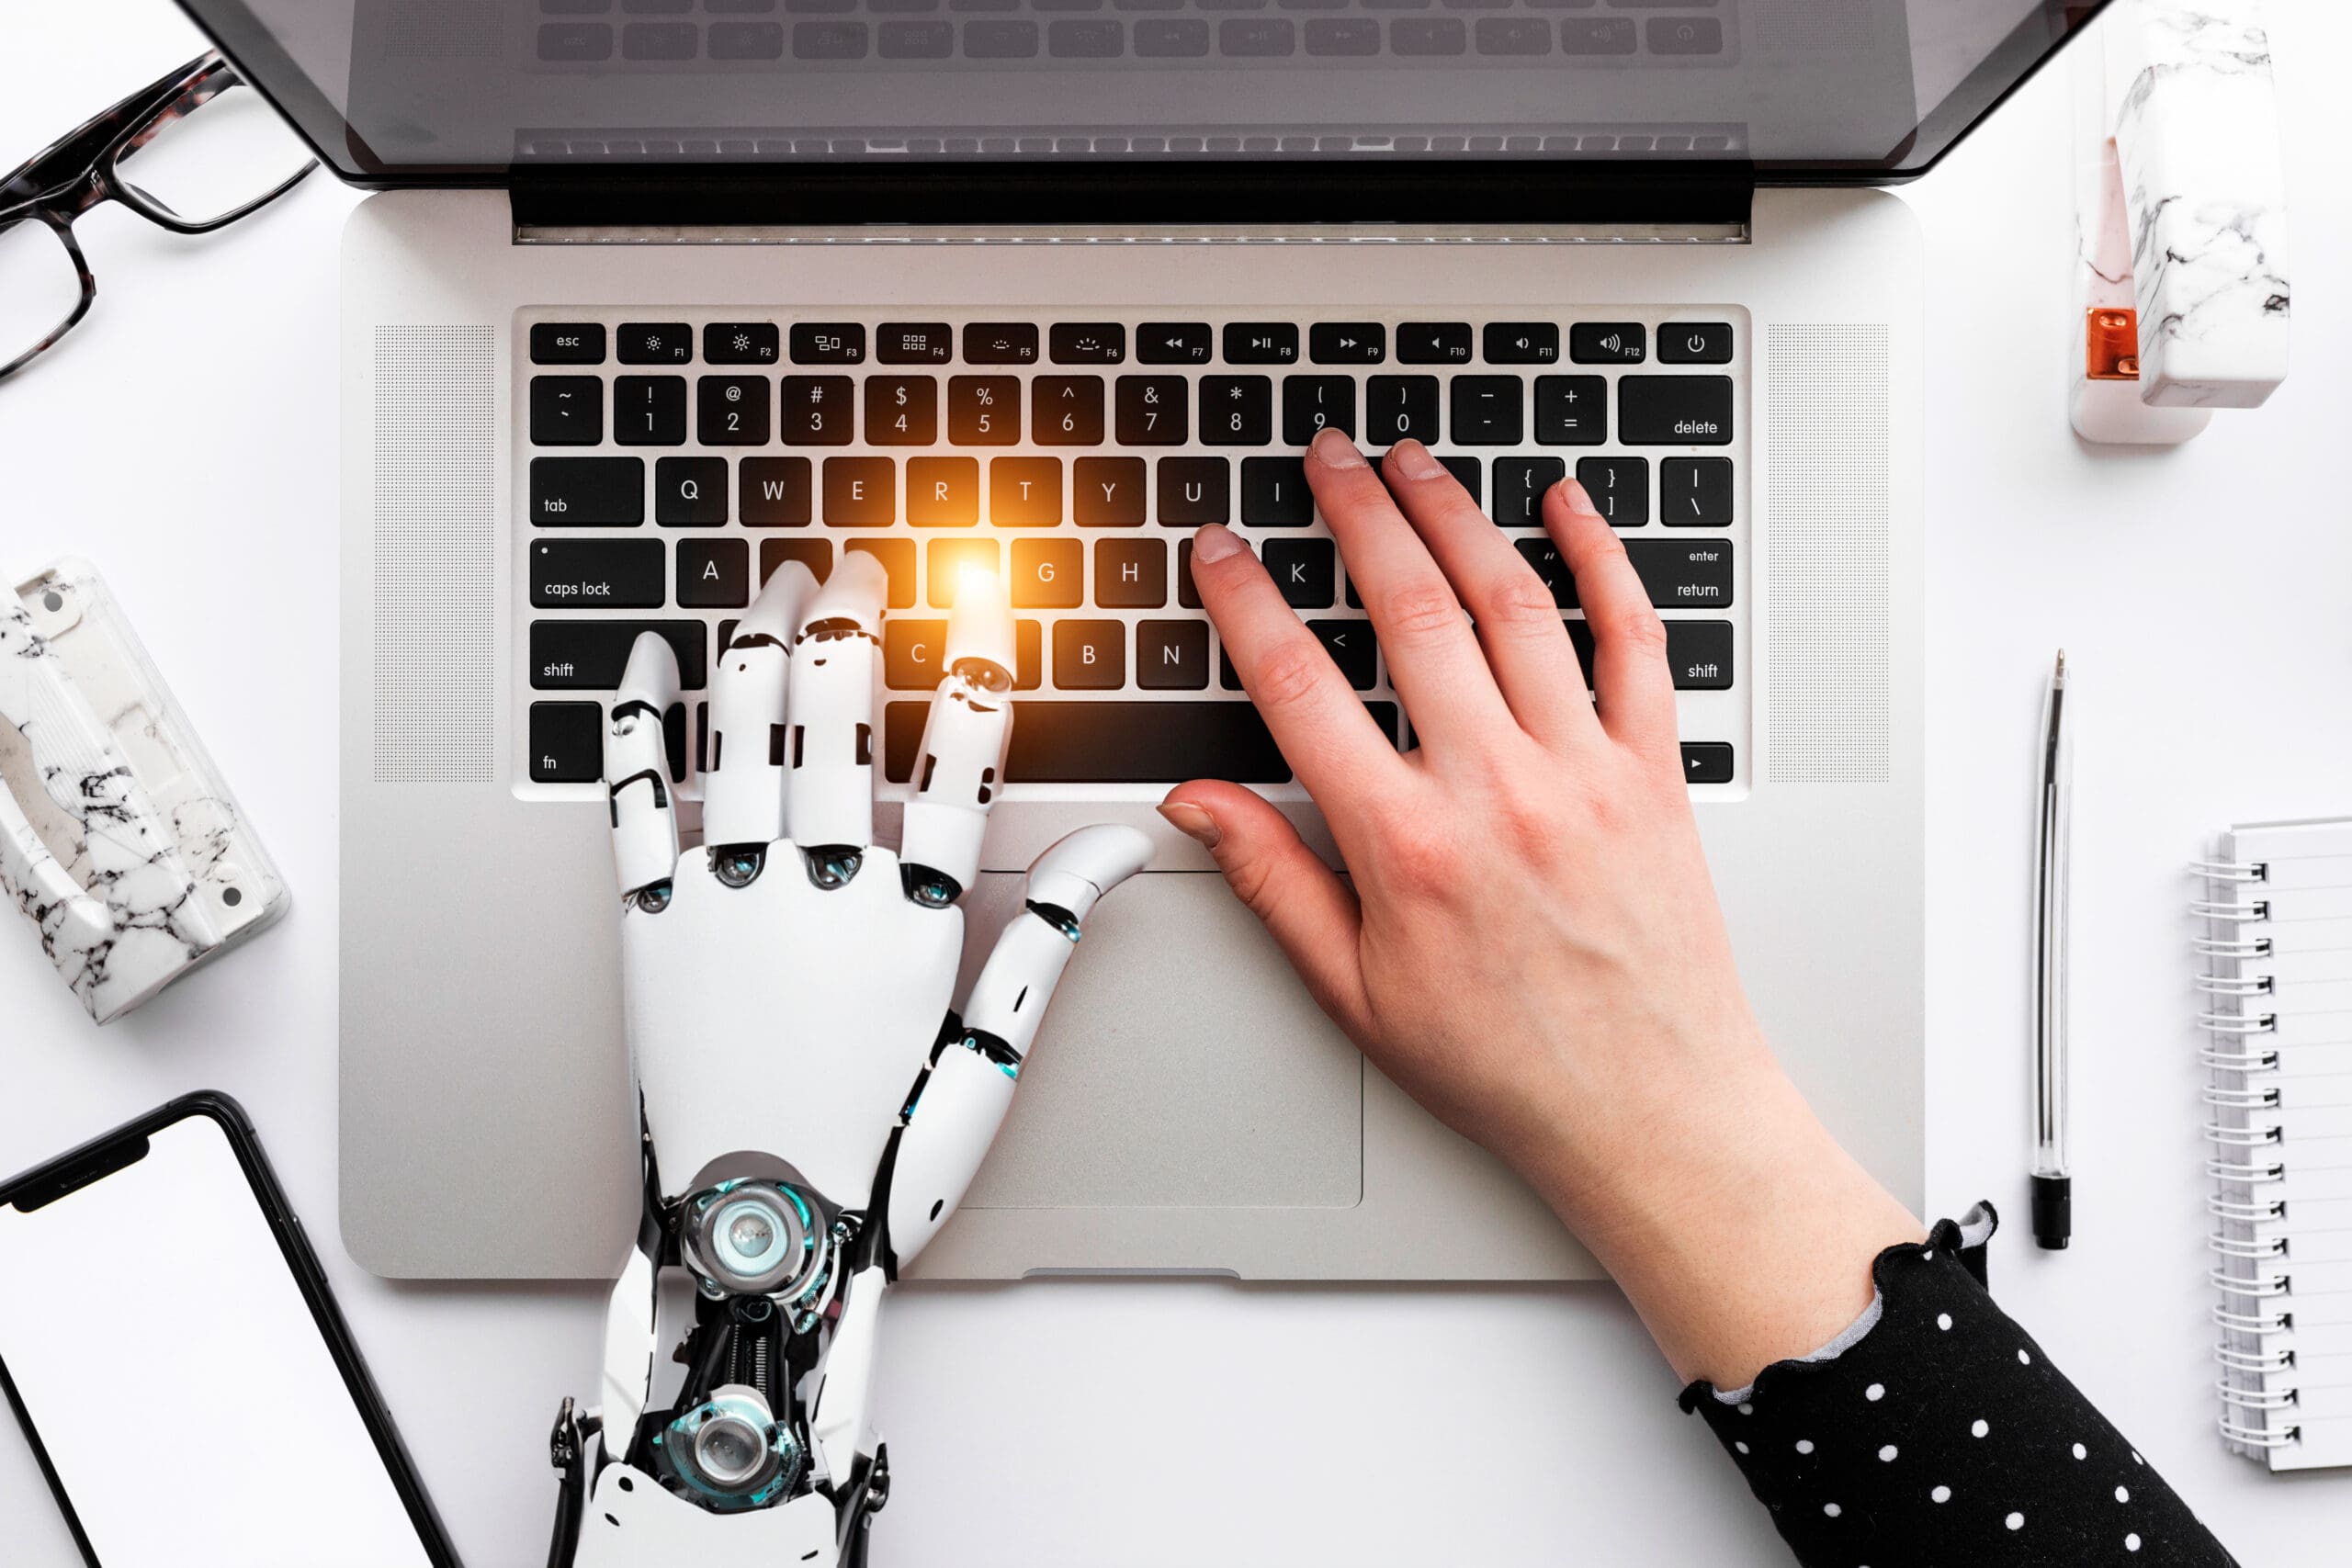 Image showing a human and a robot hand over a laptop symbolizing the theme of the blog post which is harmonizing human writing and ai